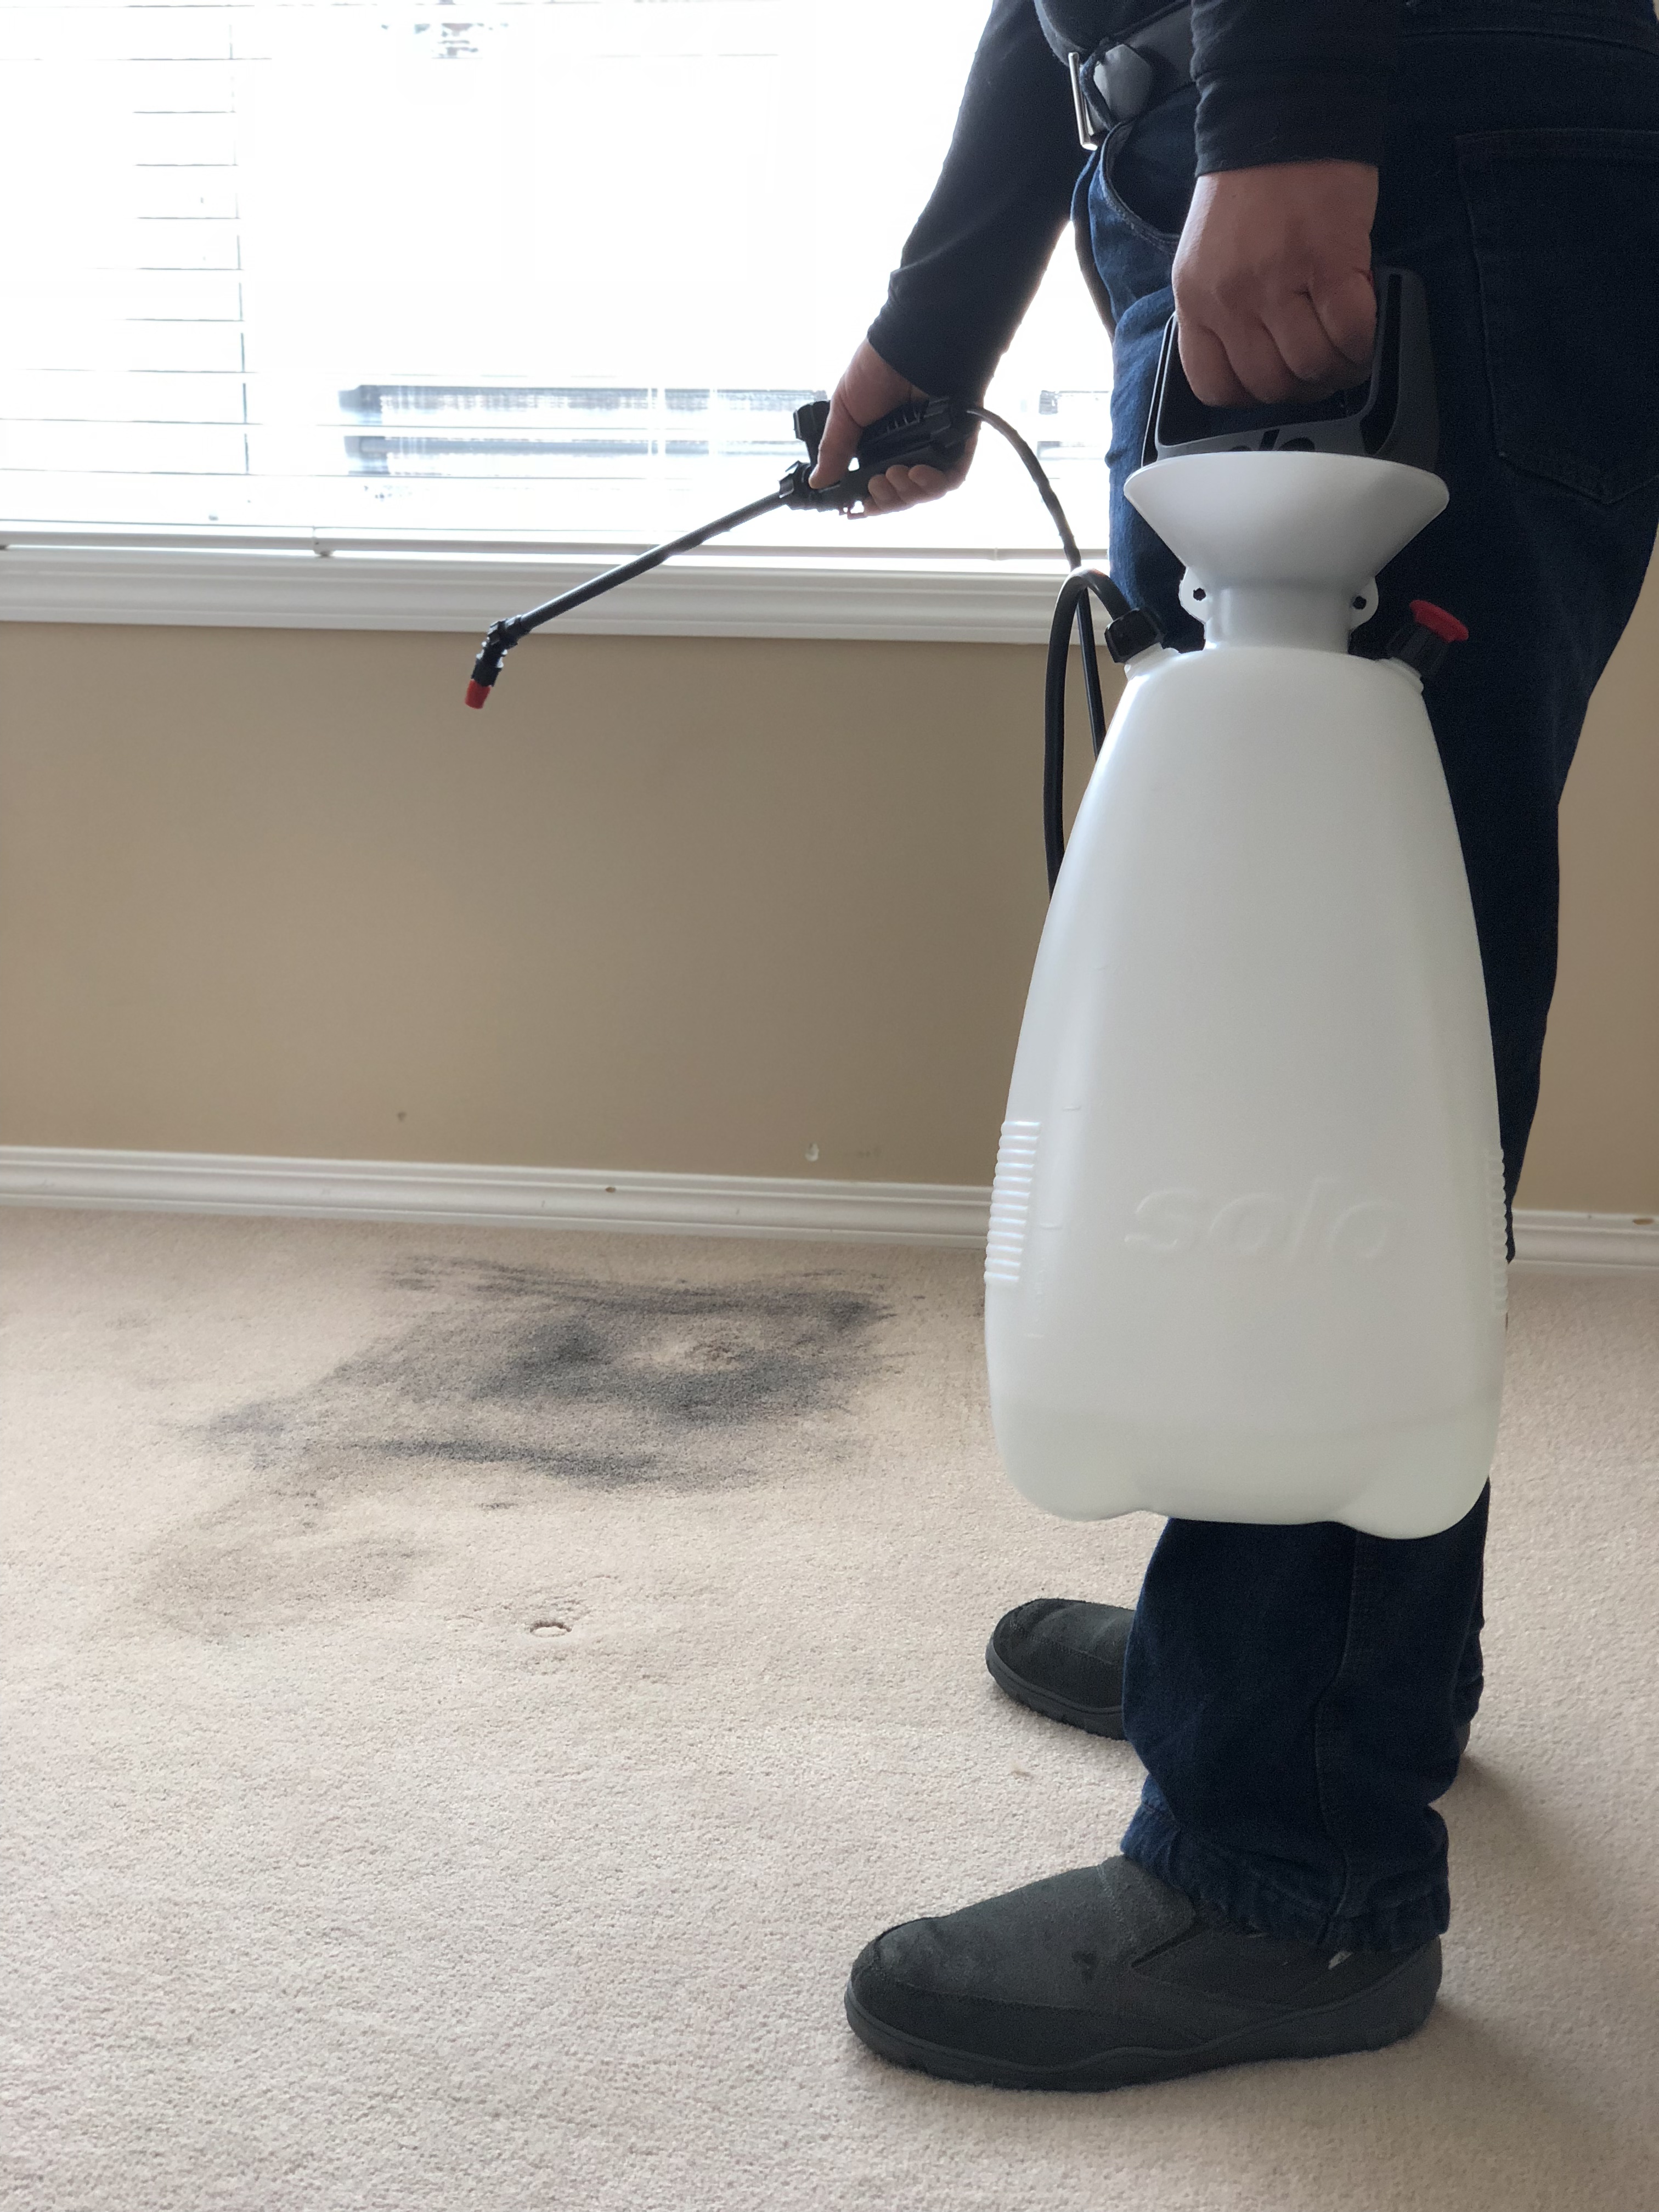 3 Reasons You’ll Want a Professional to Clean Your Carpet - Fresh Air Furnace - Furnace Services Calgary